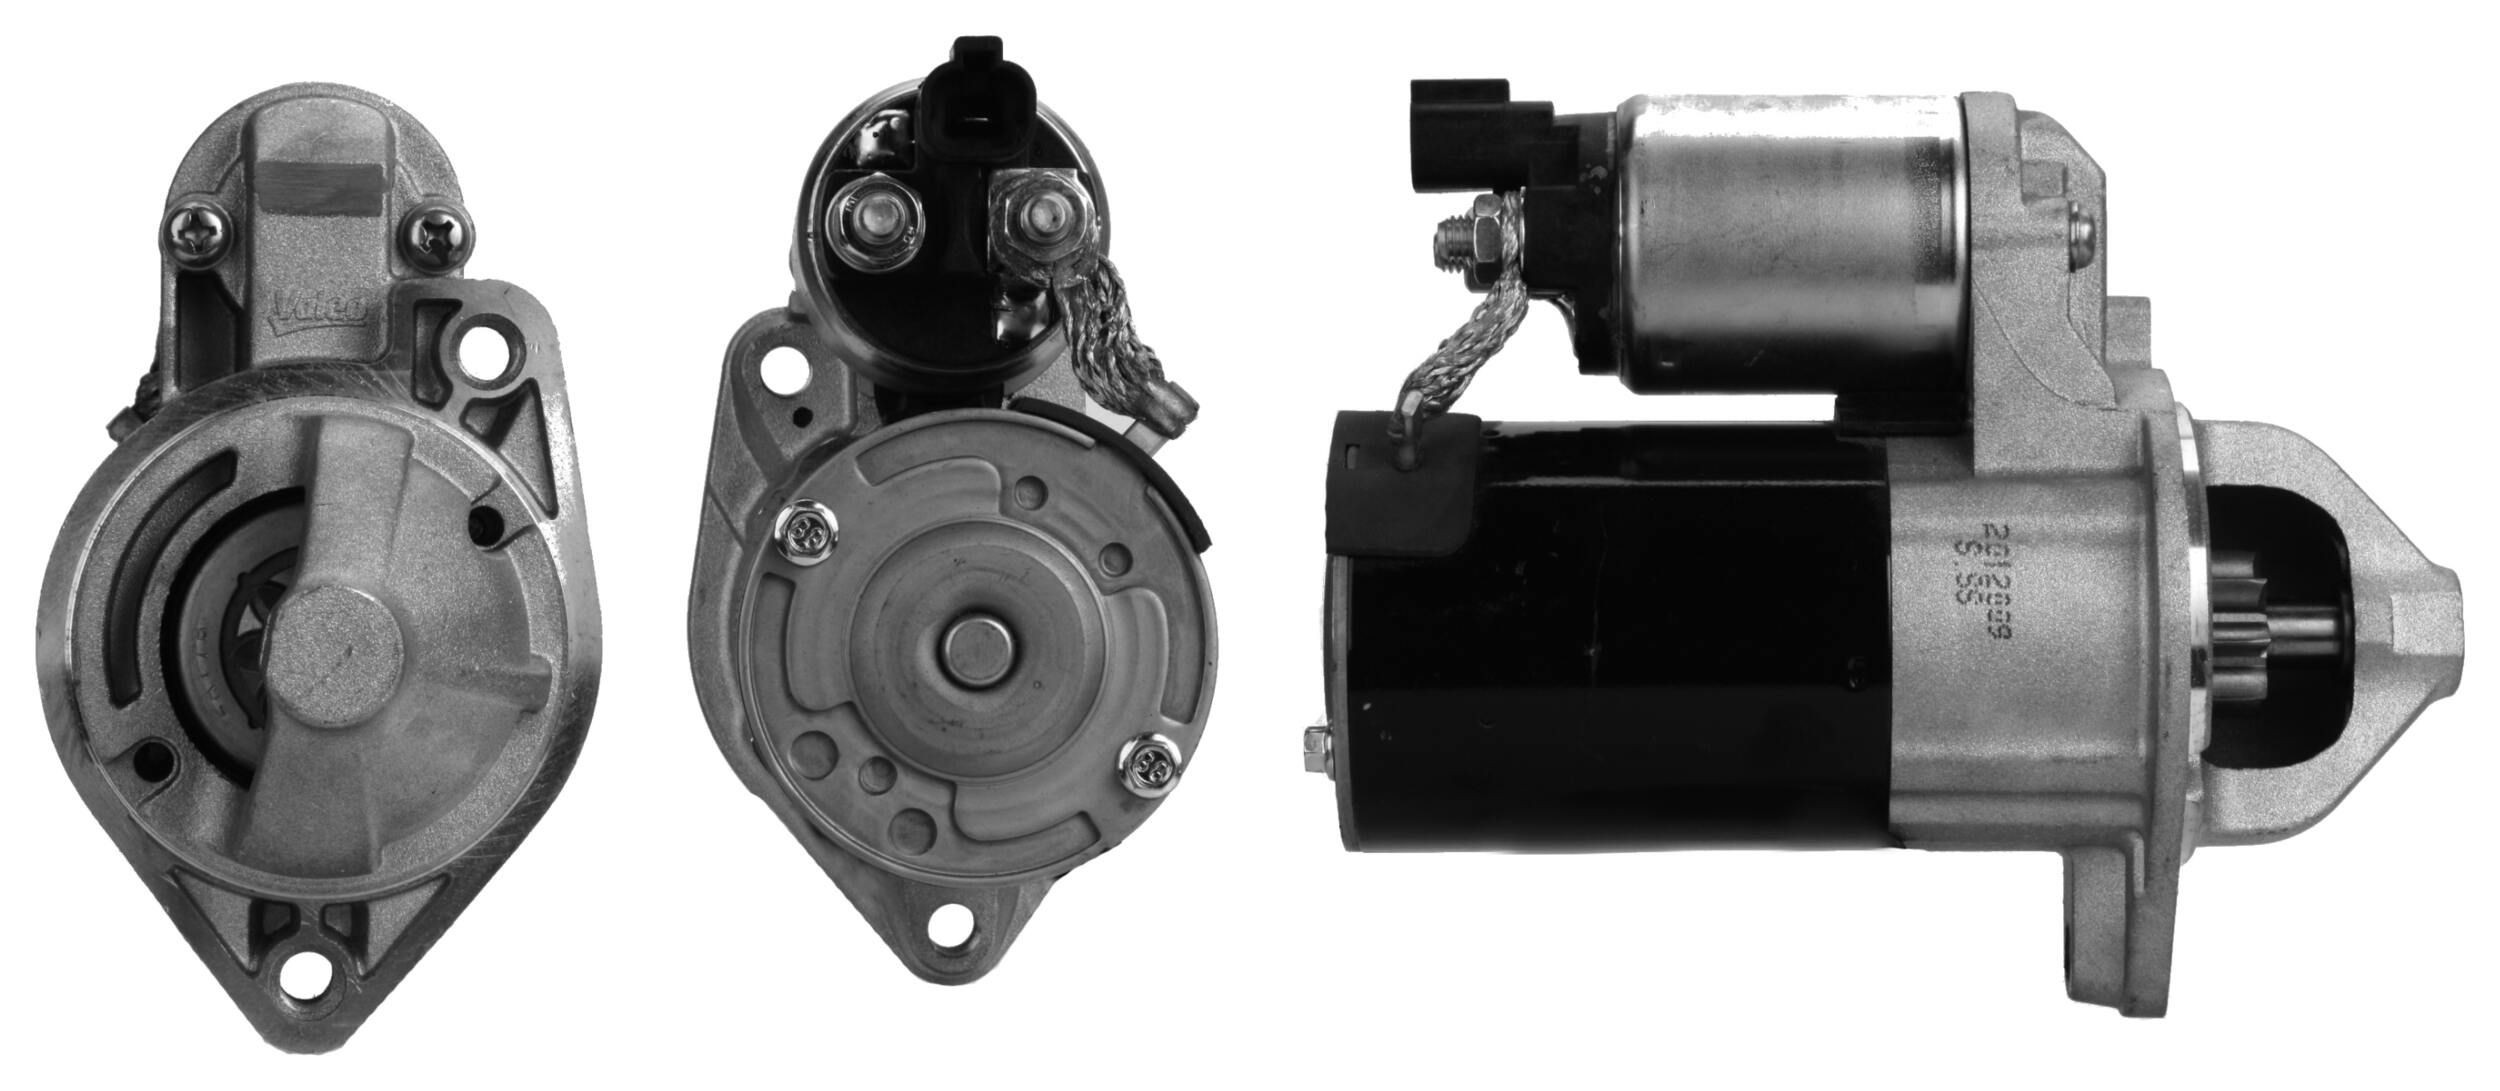 ELSTOCK 25-4202 Starter motor BMW experience and price